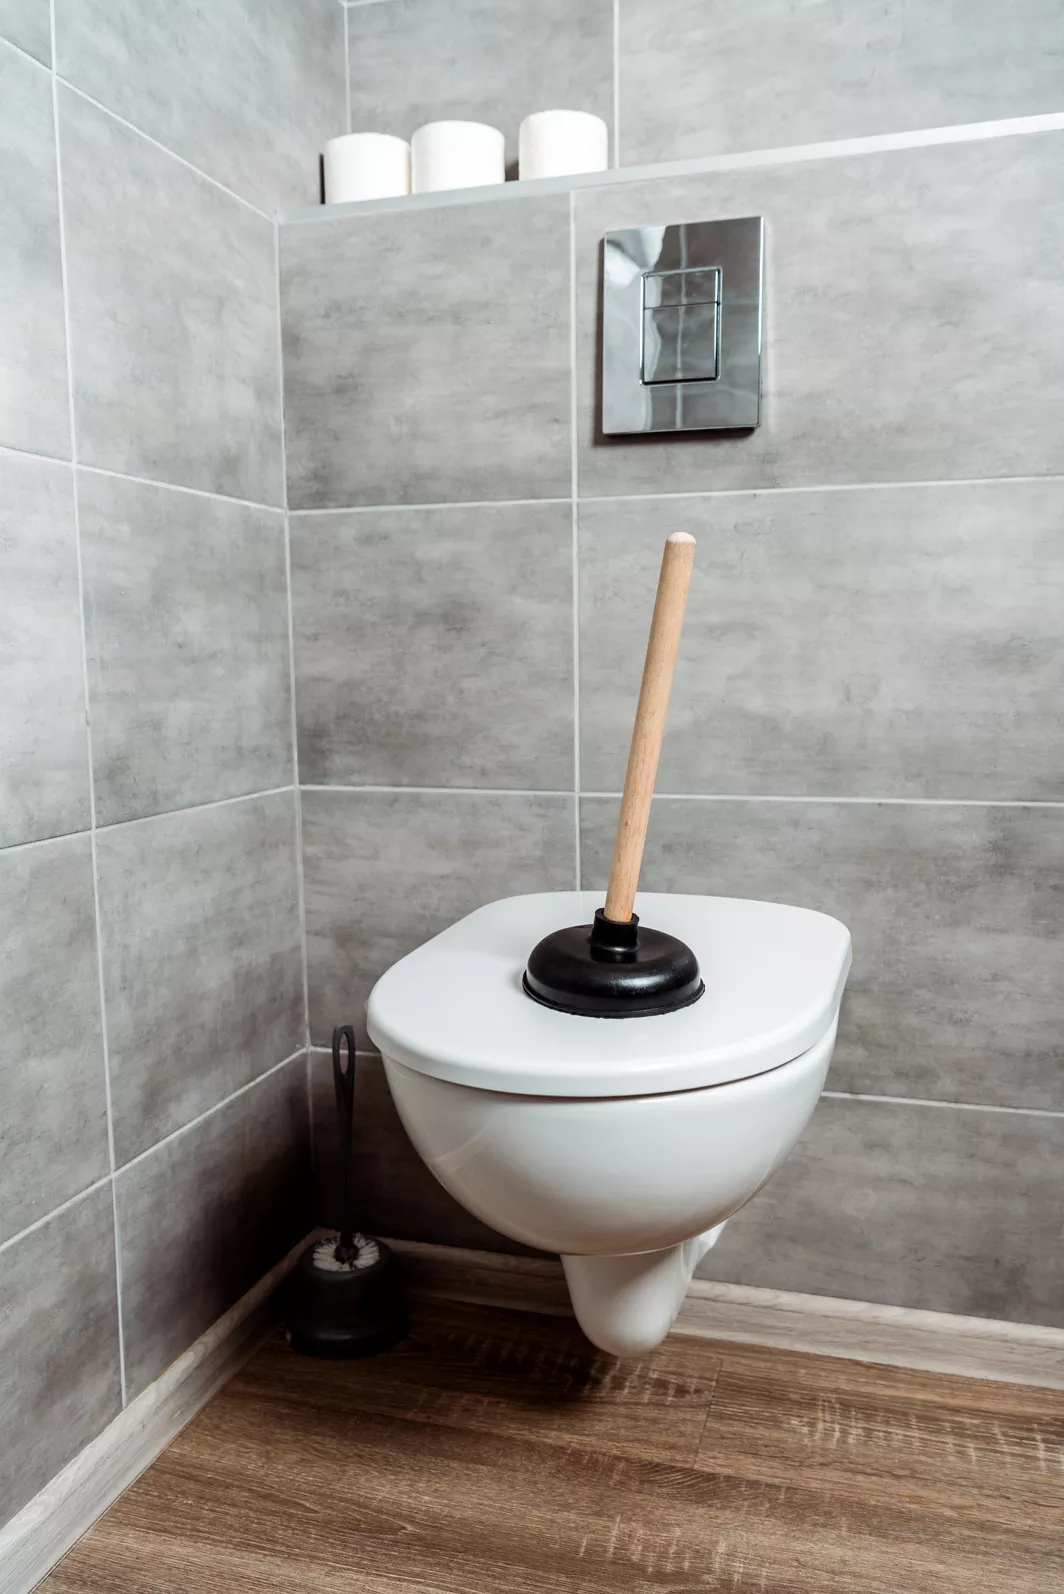 A black plunger suctioned to the top lid of a white porcelain toilet.